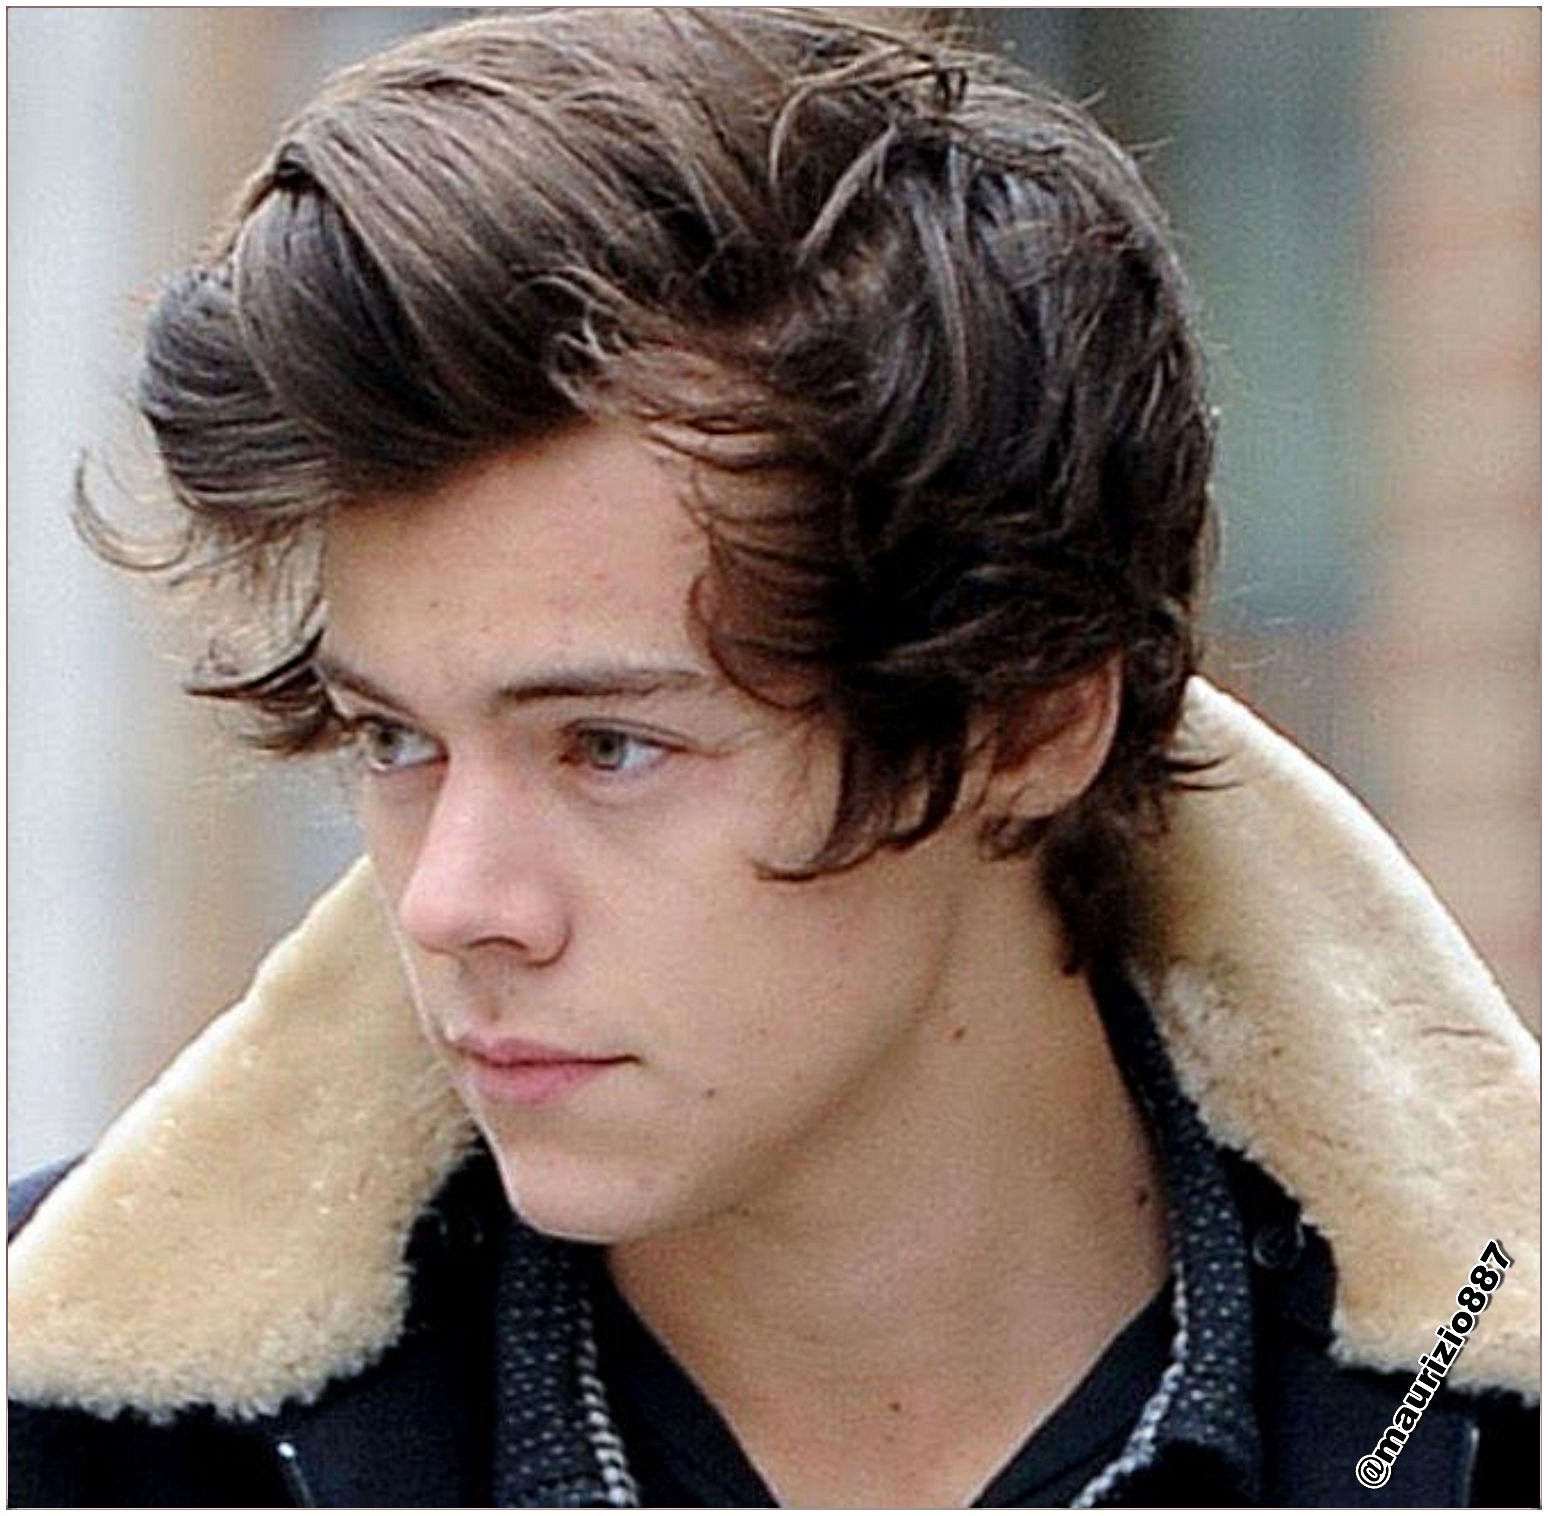 Harry Styles' hair: Sexily pushed back, the fringy type do or extra curly  and wild? - One Direction - Fanpop